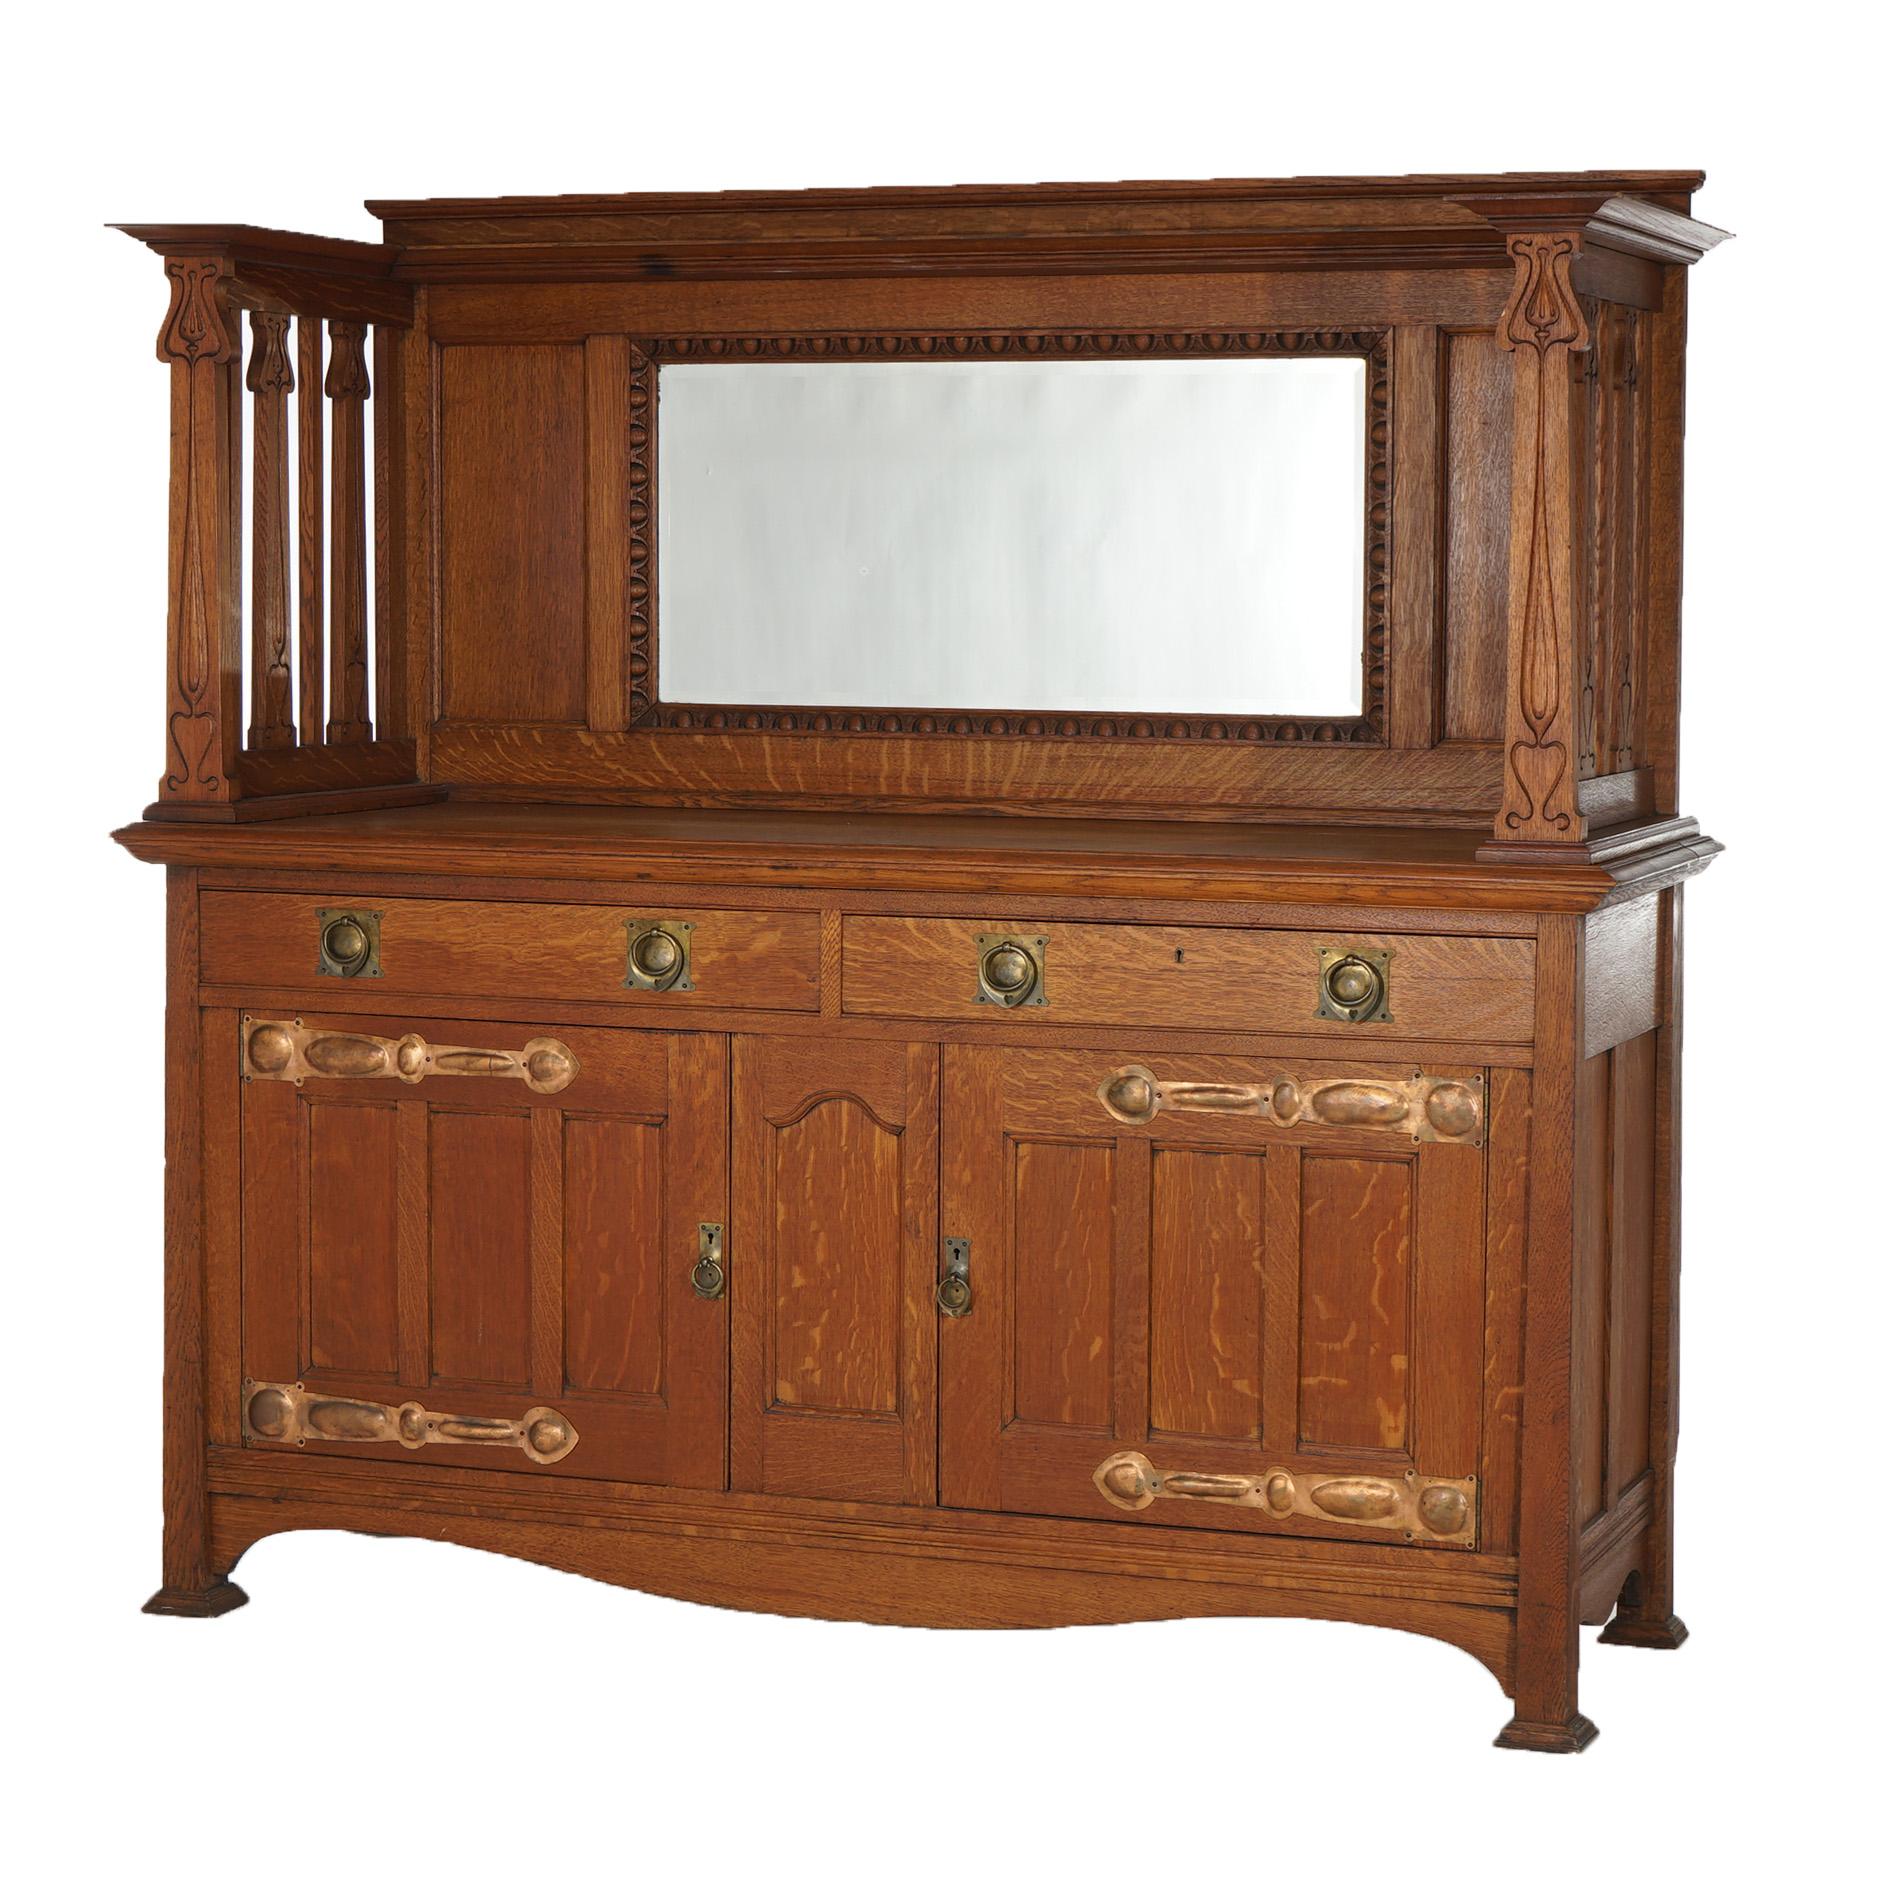 Antique English Arts & Crafts Liberty & Co. Oak Sideboard With Mirror C1910 In Good Condition For Sale In Big Flats, NY